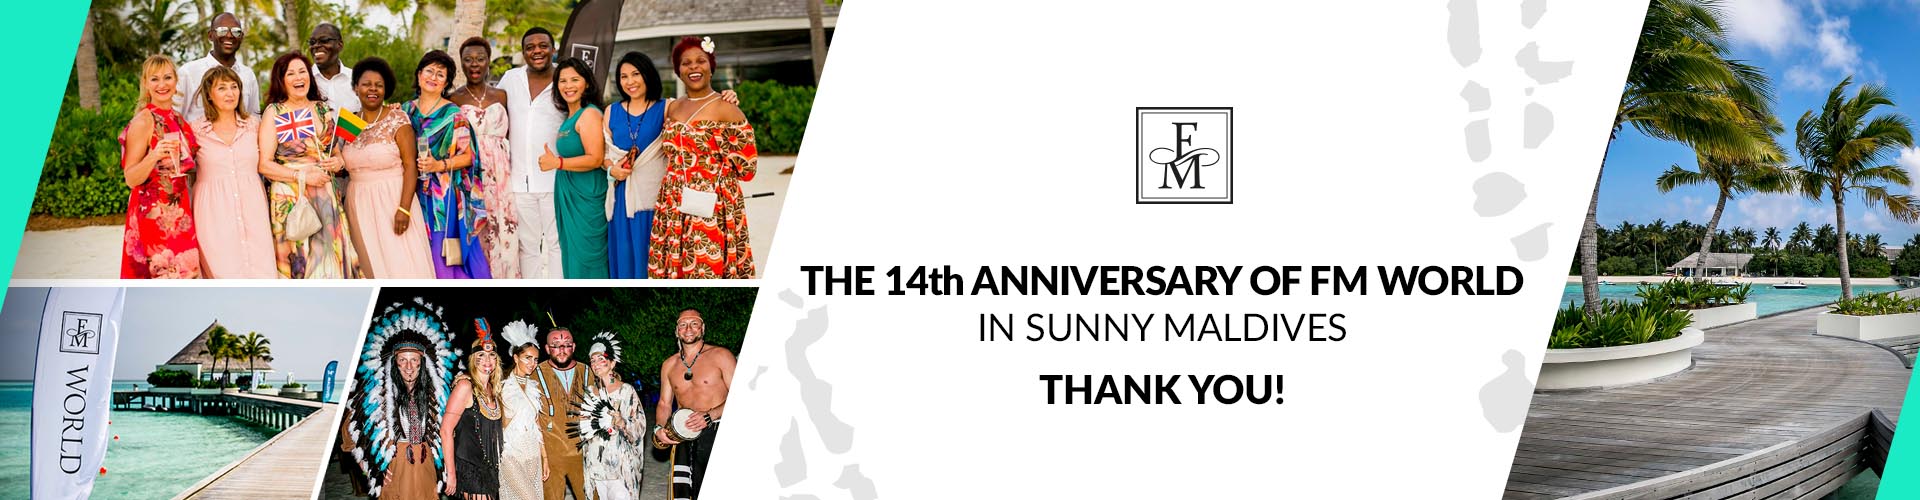 The 14th Anniversary of FM WORLD in Maldives - Thank you!